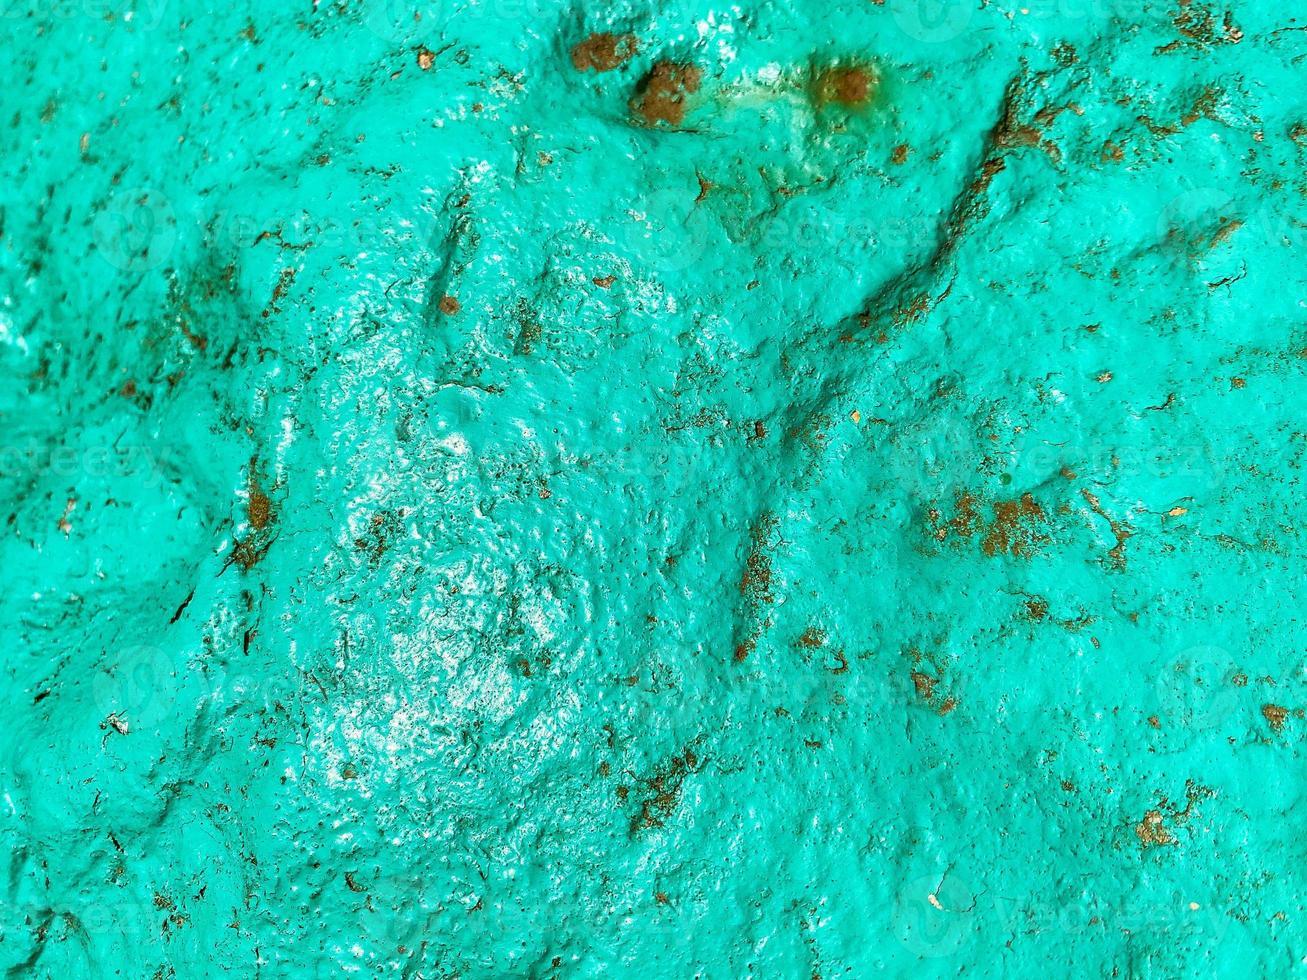 bulk paint on a piece of metal. the texture is turquoise, interspersed with rust and holes. peeling paint, cracked material. paint and metal background photo